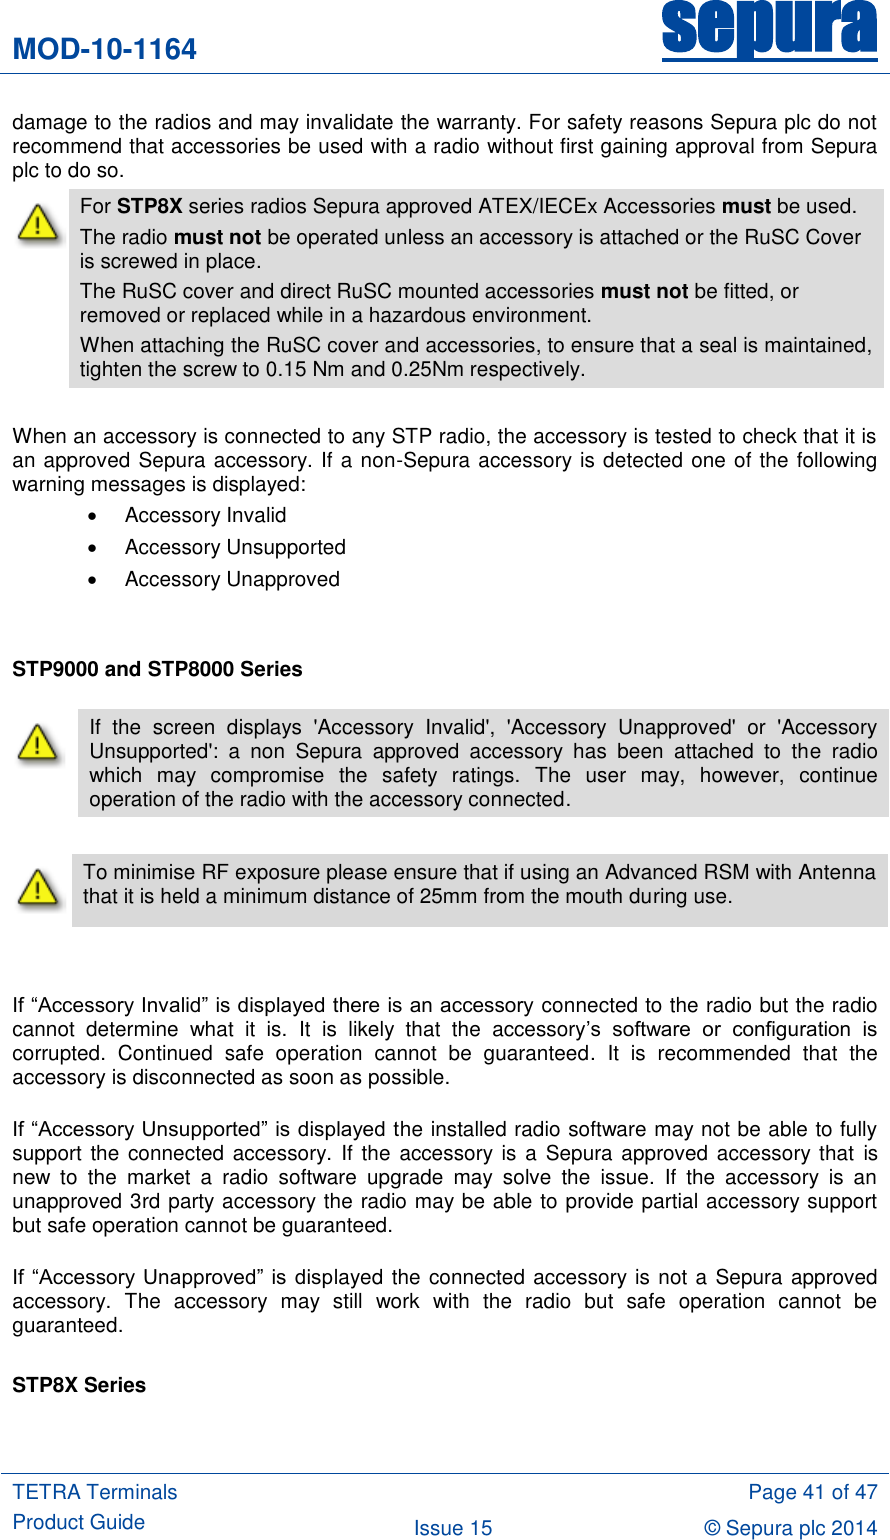 MOD-10-1164 sepura  TETRA Terminals Product Guide  Page 41 of 47 Issue 15 © Sepura plc 2014   damage to the radios and may invalidate the warranty. For safety reasons Sepura plc do not recommend that accessories be used with a radio without first gaining approval from Sepura plc to do so.  For STP8X series radios Sepura approved ATEX/IECEx Accessories must be used. The radio must not be operated unless an accessory is attached or the RuSC Cover is screwed in place.   The RuSC cover and direct RuSC mounted accessories must not be fitted, or removed or replaced while in a hazardous environment. When attaching the RuSC cover and accessories, to ensure that a seal is maintained, tighten the screw to 0.15 Nm and 0.25Nm respectively.  When an accessory is connected to any STP radio, the accessory is tested to check that it is an approved Sepura accessory. If a non-Sepura accessory is detected one of the following warning messages is displayed:   Accessory Invalid   Accessory Unsupported   Accessory Unapproved   STP9000 and STP8000 Series   To minimise RF exposure please ensure that if using an Advanced RSM with Antenna that it is held a minimum distance of 25mm from the mouth during use.   If “Accessory Invalid” is displayed there is an accessory connected to the radio but the radio cannot  determine  what  it  is.  It  is  likely  that  the  accessory‟s  software  or  configuration  is corrupted.  Continued  safe  operation  cannot  be  guaranteed.  It  is  recommended  that  the accessory is disconnected as soon as possible.  If “Accessory Unsupported” is displayed the installed radio software may not be able to fully support  the connected accessory.  If the  accessory is a Sepura  approved accessory that  is new  to  the  market  a  radio  software  upgrade  may  solve  the  issue.  If  the  accessory  is  an unapproved 3rd party accessory the radio may be able to provide partial accessory support but safe operation cannot be guaranteed.  If “Accessory  Unapproved” is  displayed the connected accessory is not a Sepura approved accessory.  The  accessory  may  still  work  with  the  radio  but  safe  operation  cannot  be guaranteed.  STP8X Series   If  the  screen  displays  &apos;Accessory  Invalid&apos;,  &apos;Accessory  Unapproved&apos;  or  &apos;Accessory Unsupported&apos;:  a  non  Sepura  approved  accessory  has  been  attached  to  the  radio which  may  compromise  the  safety  ratings.  The  user  may,  however,  continue operation of the radio with the accessory connected. 